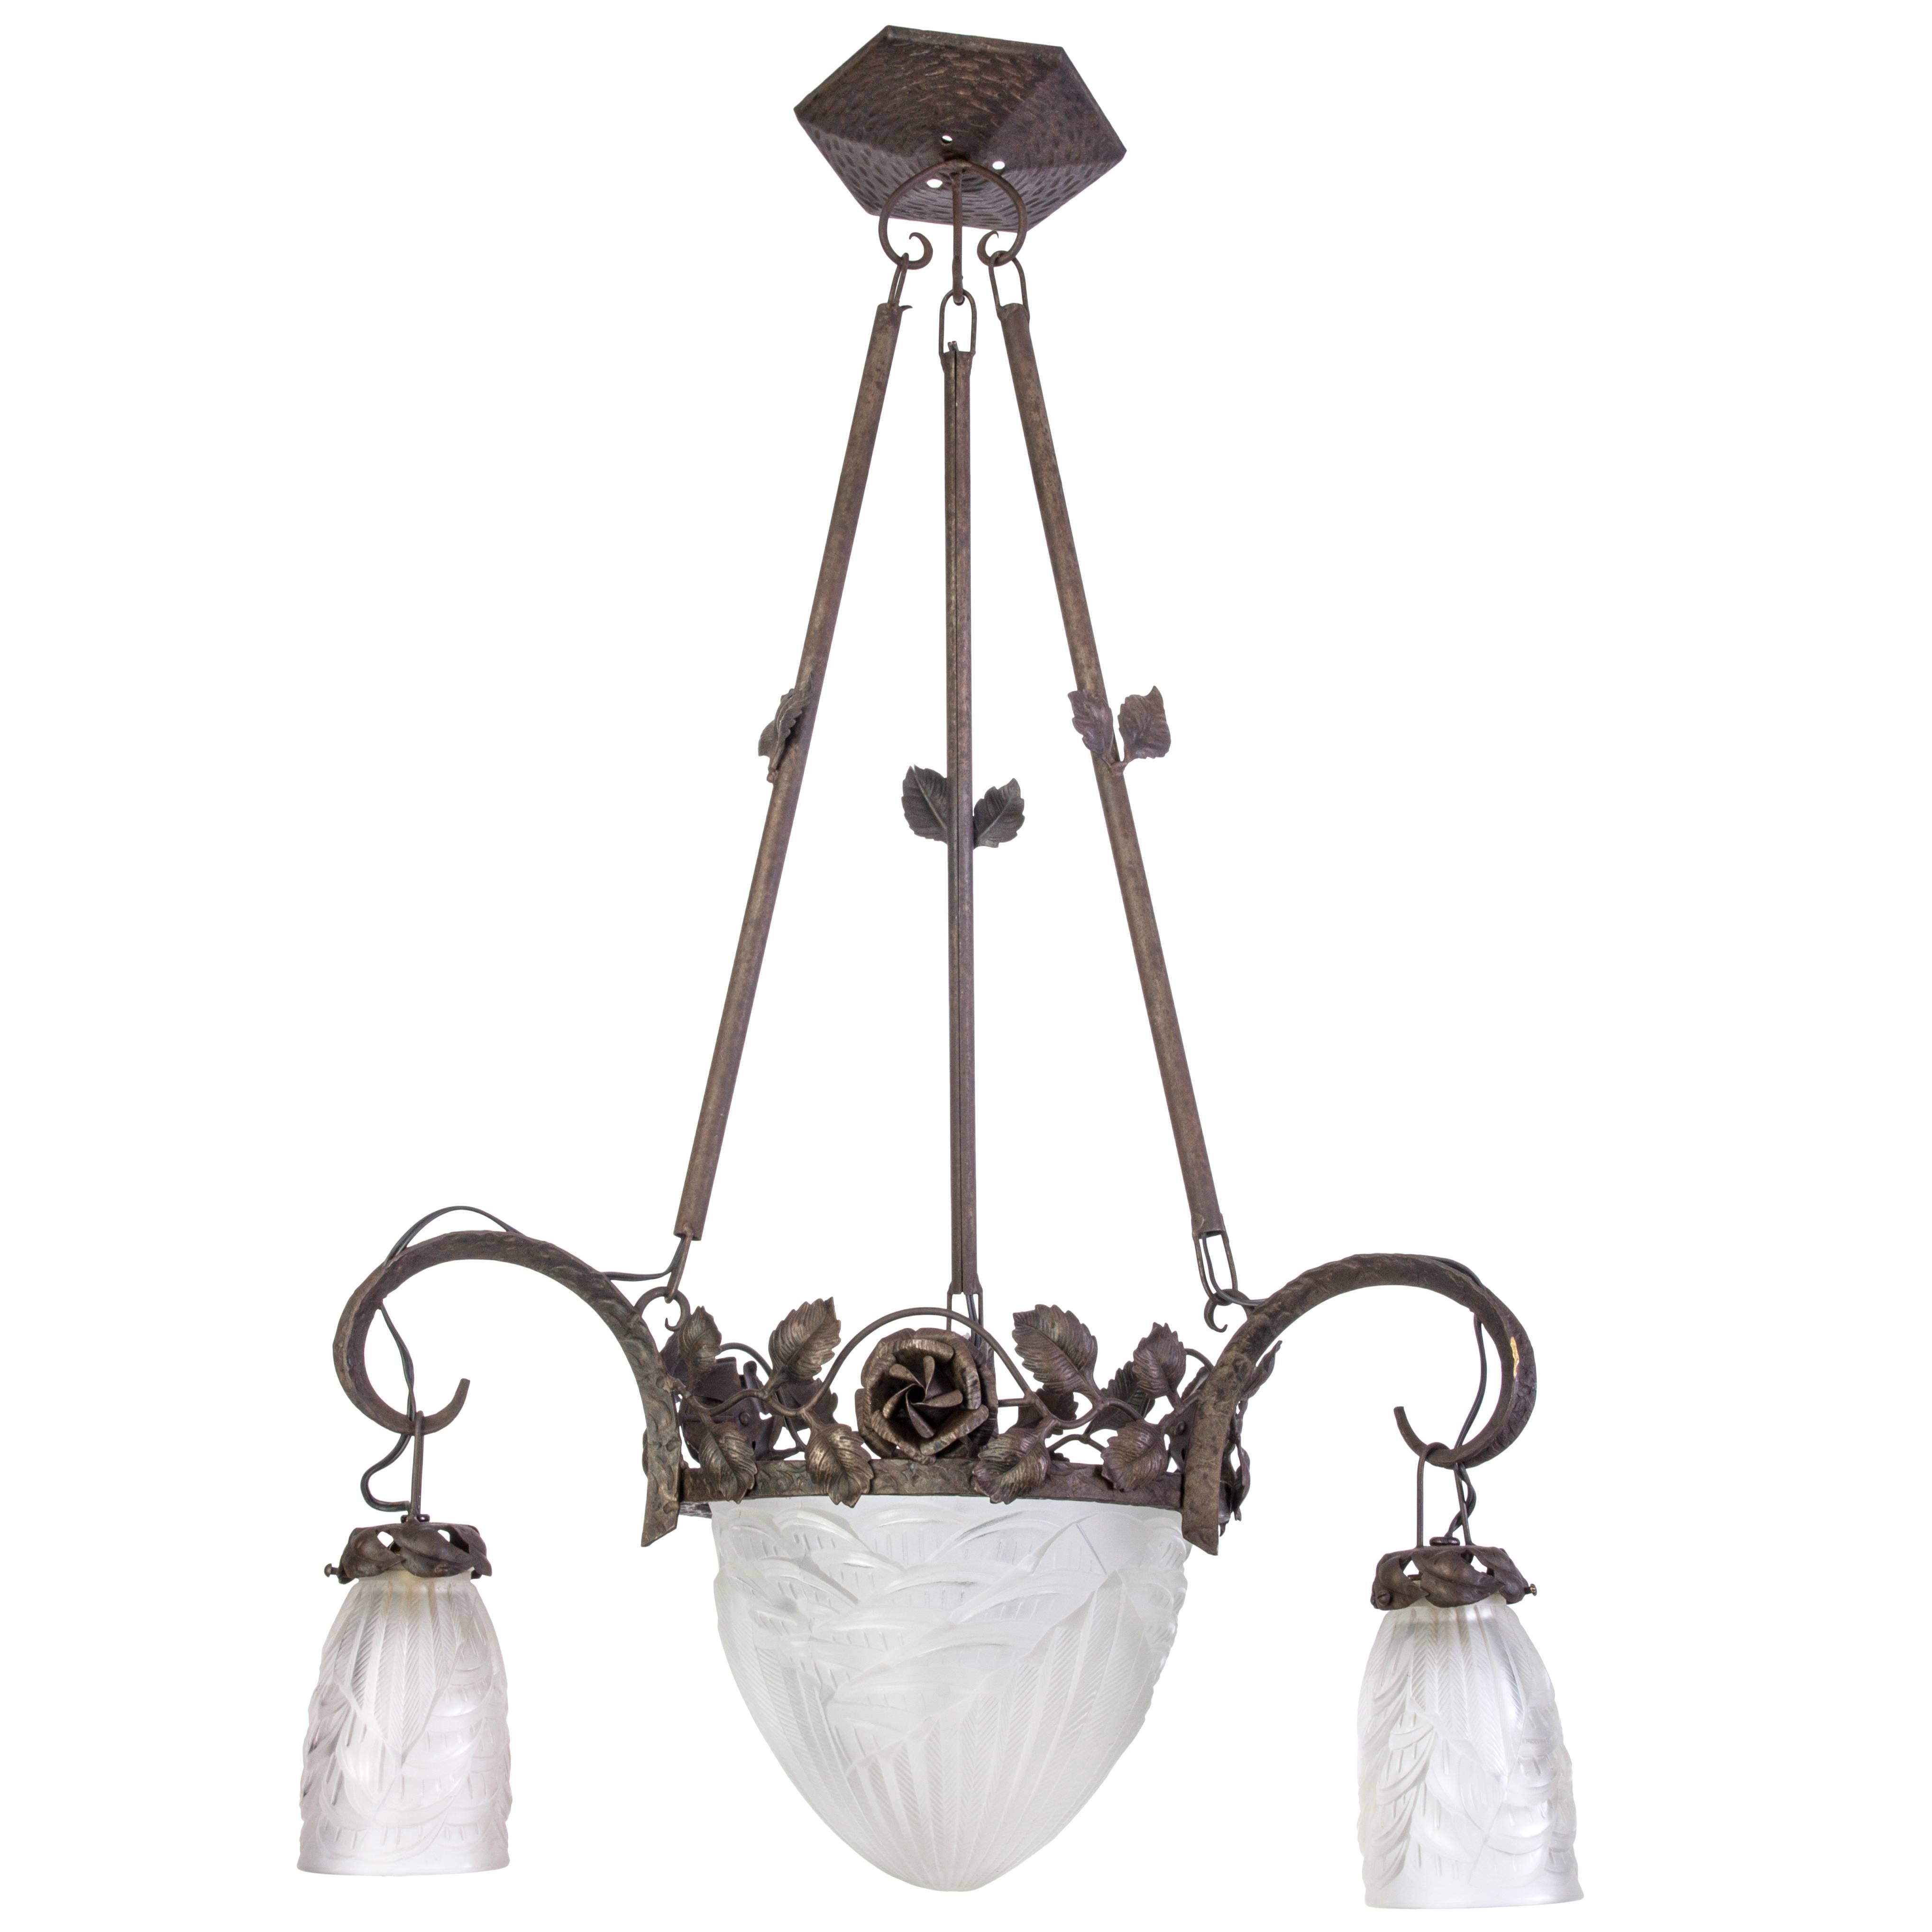 Magnificent Early French Art Deco Chandelier by Charles Schneider